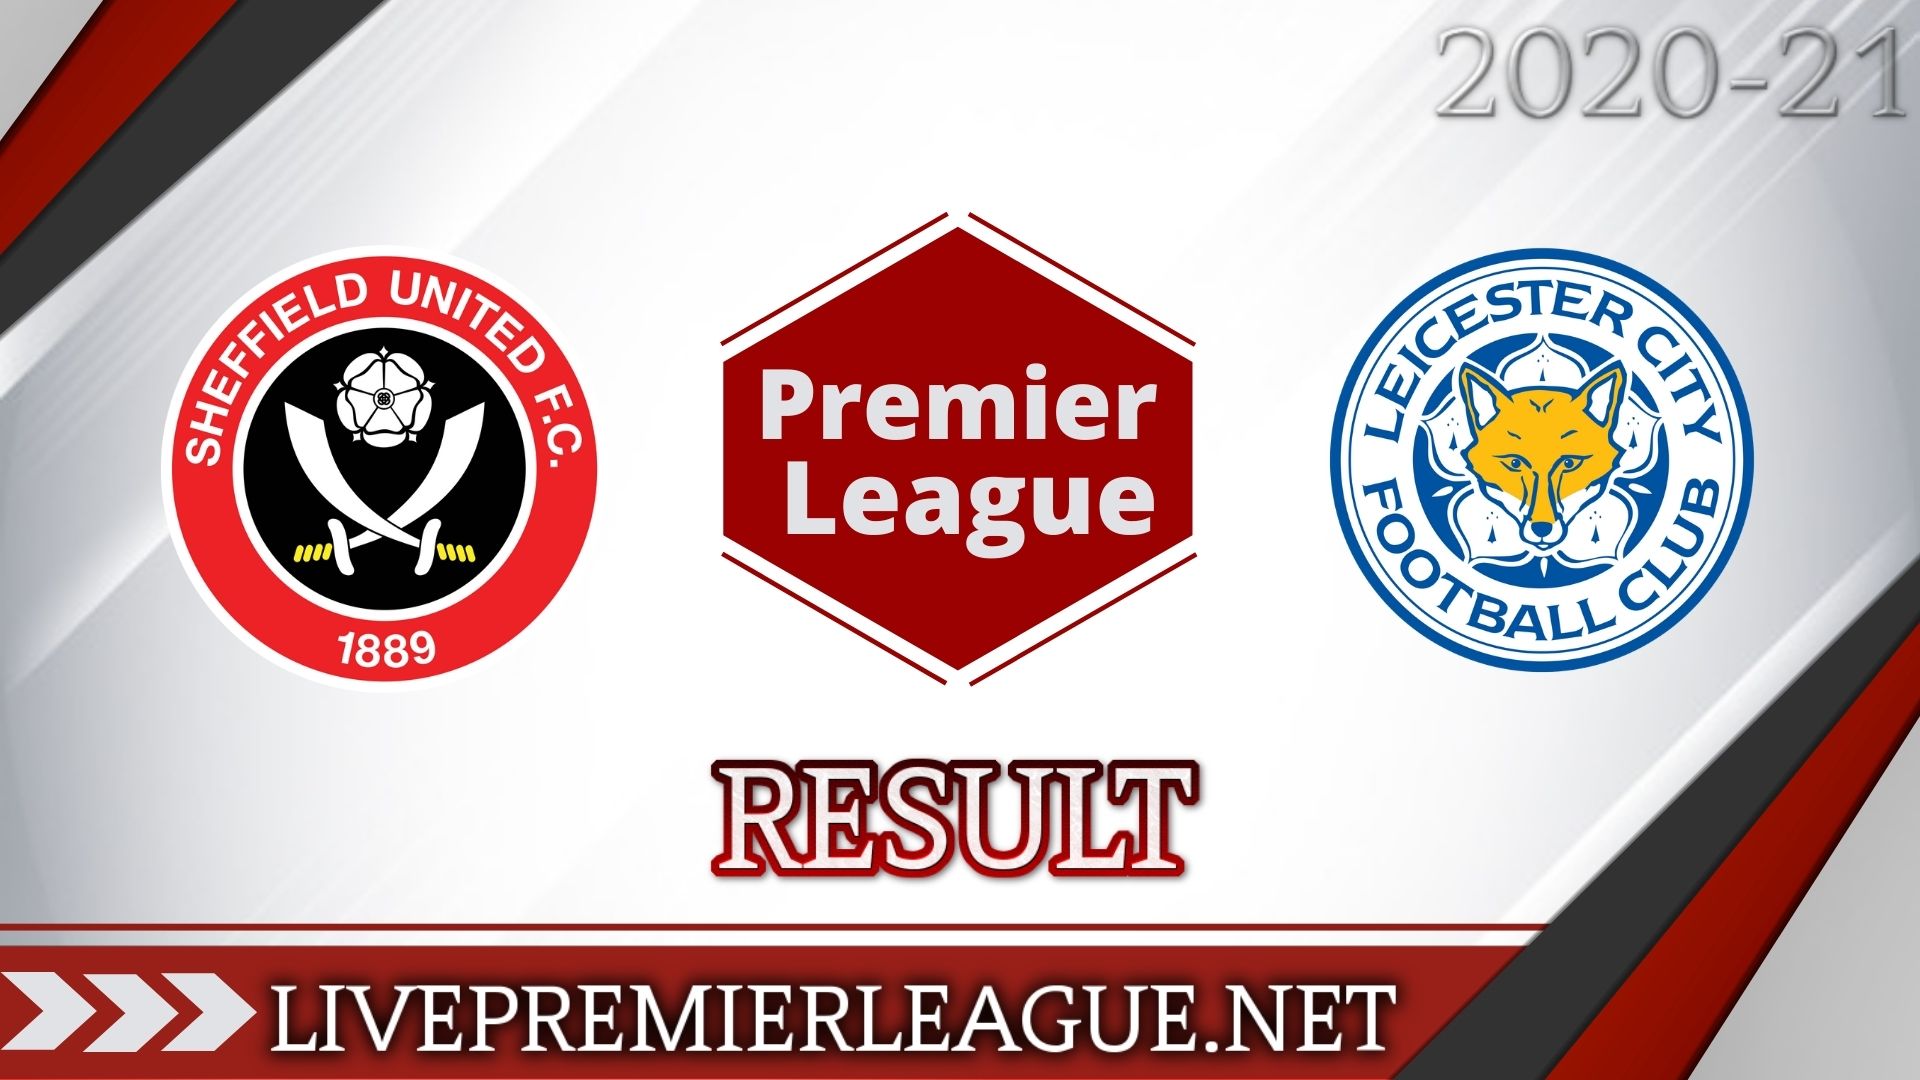 Sheffield United Vs Leicester City | Week 11 Result 2020